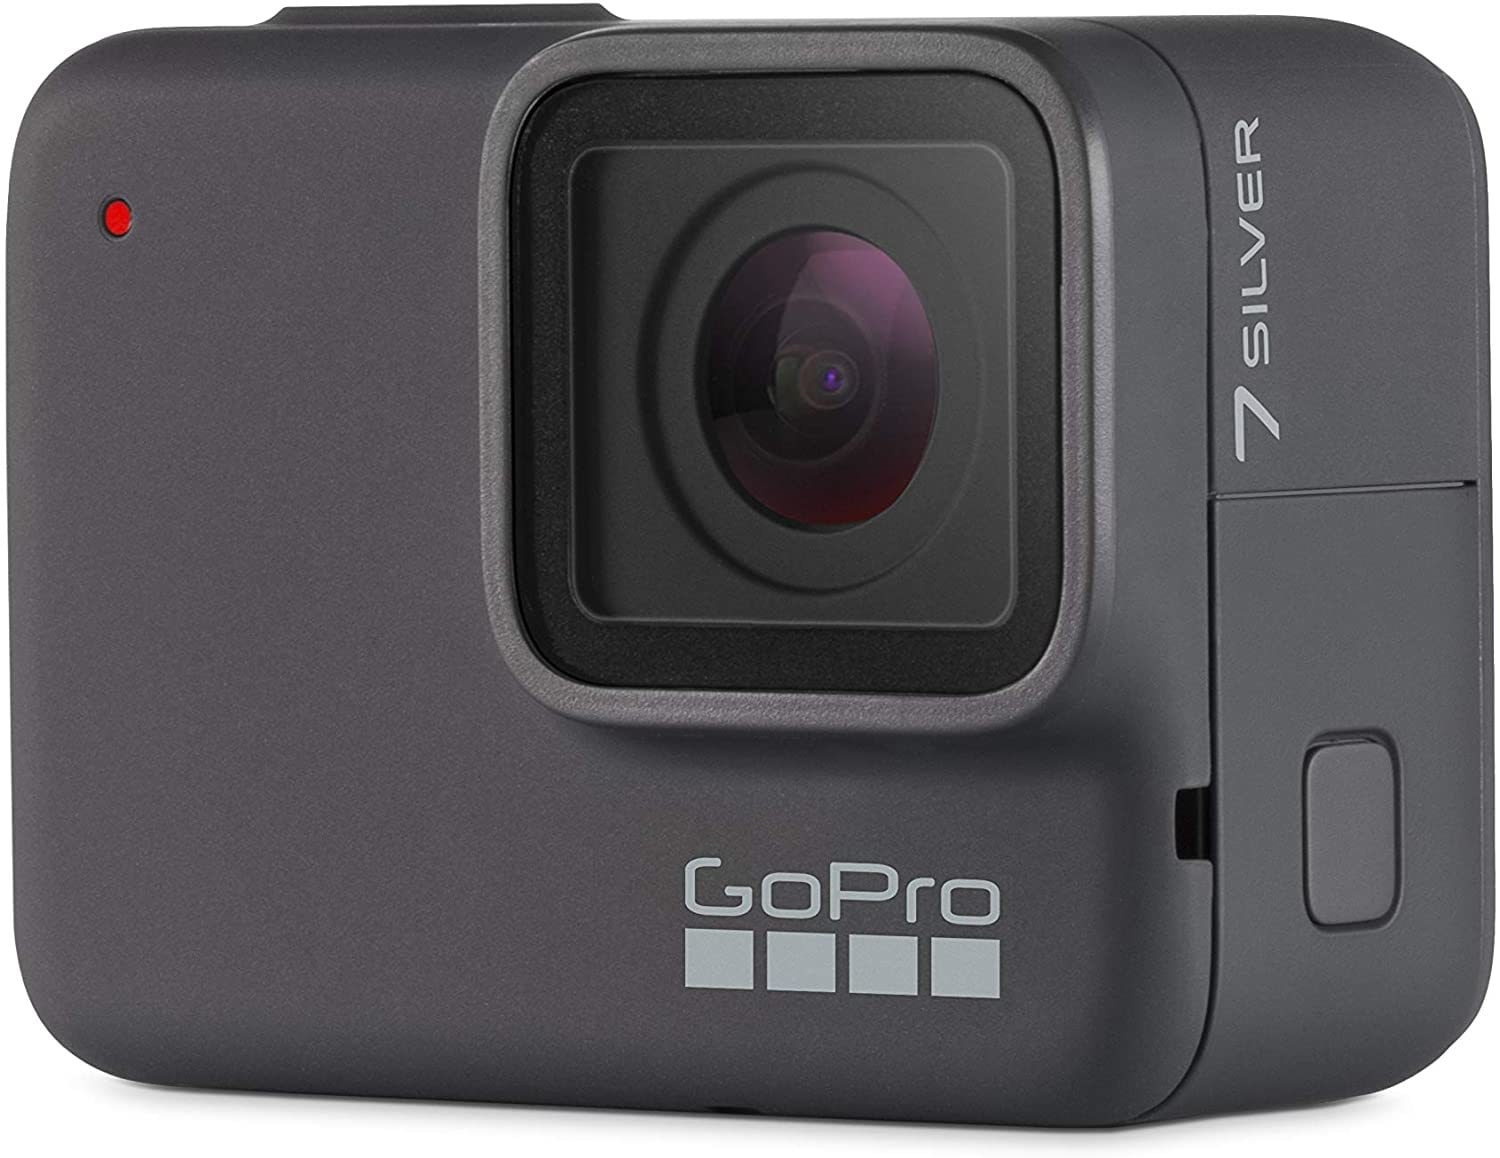 Buy Gopro Hero7 Silver Waterproof Digital Action Camera With Touch Screen 4k Hd Video 10mp Photos Online Shop Electronics Appliances On Carrefour Uae